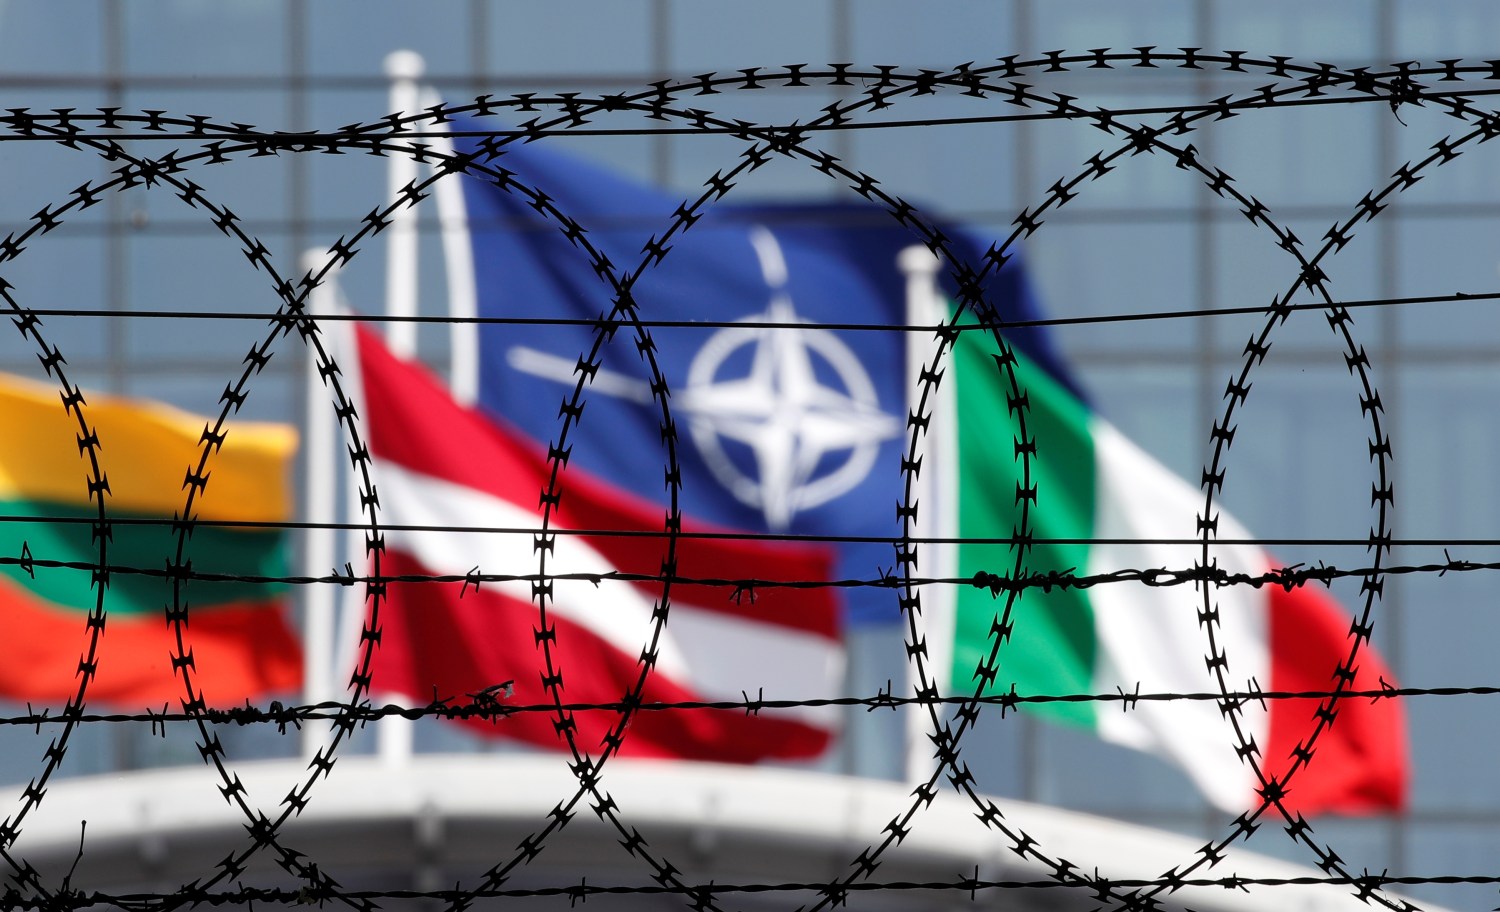 The NATO flag is seen through barbed wire as it flies in front of the new NATO Headquarters in Brussels, Belgium May 24, 2017. Member nations will inaugurate the new NATO headquarters during a summit in Brussels, Belgium May 25, 2017. REUTERS/Christian Hartmann - RTX37E51